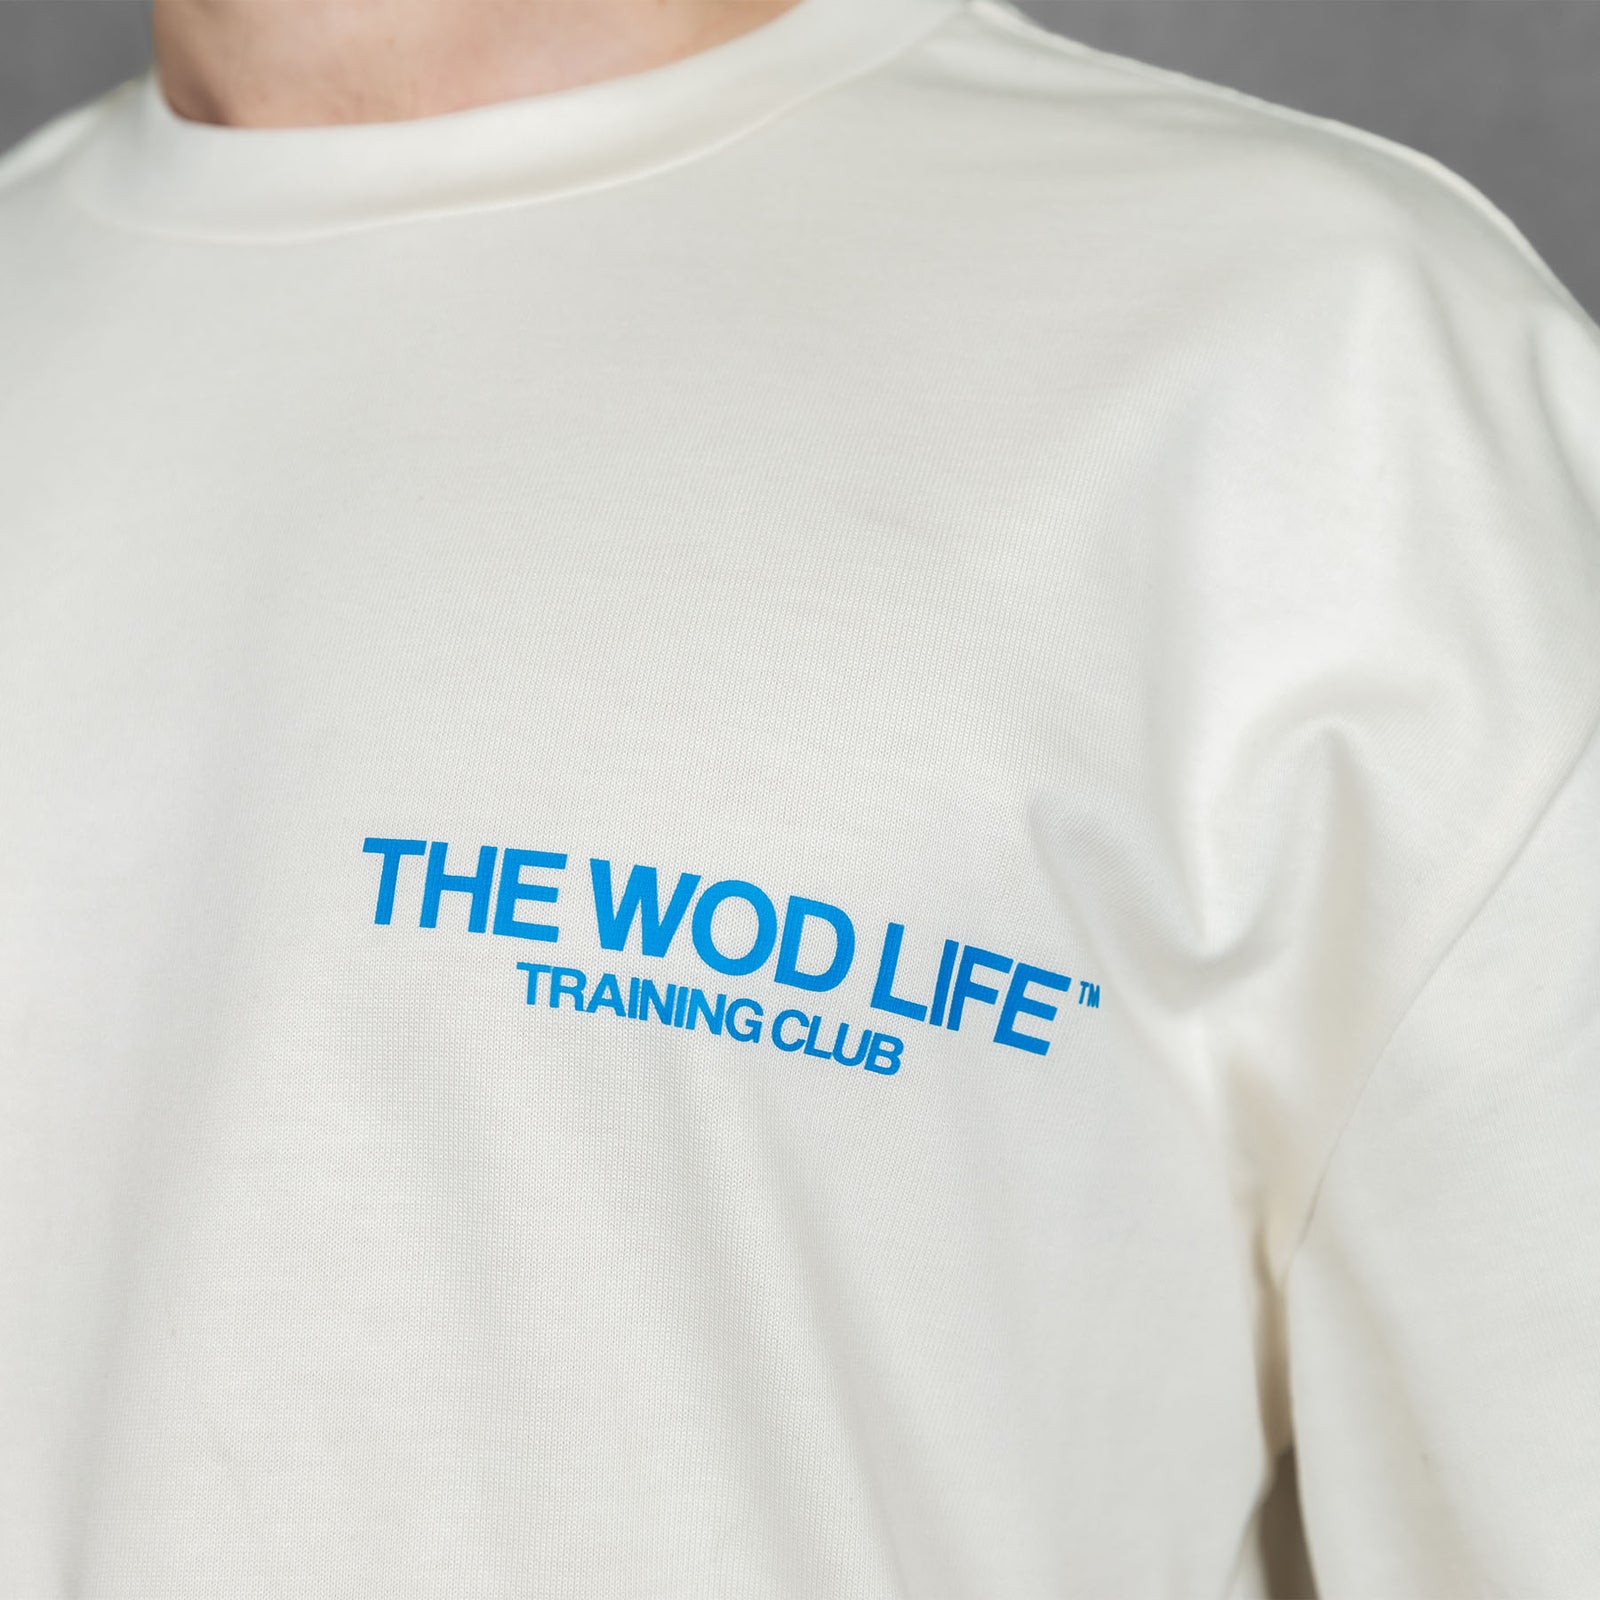 The WOD Life - The Home of Training